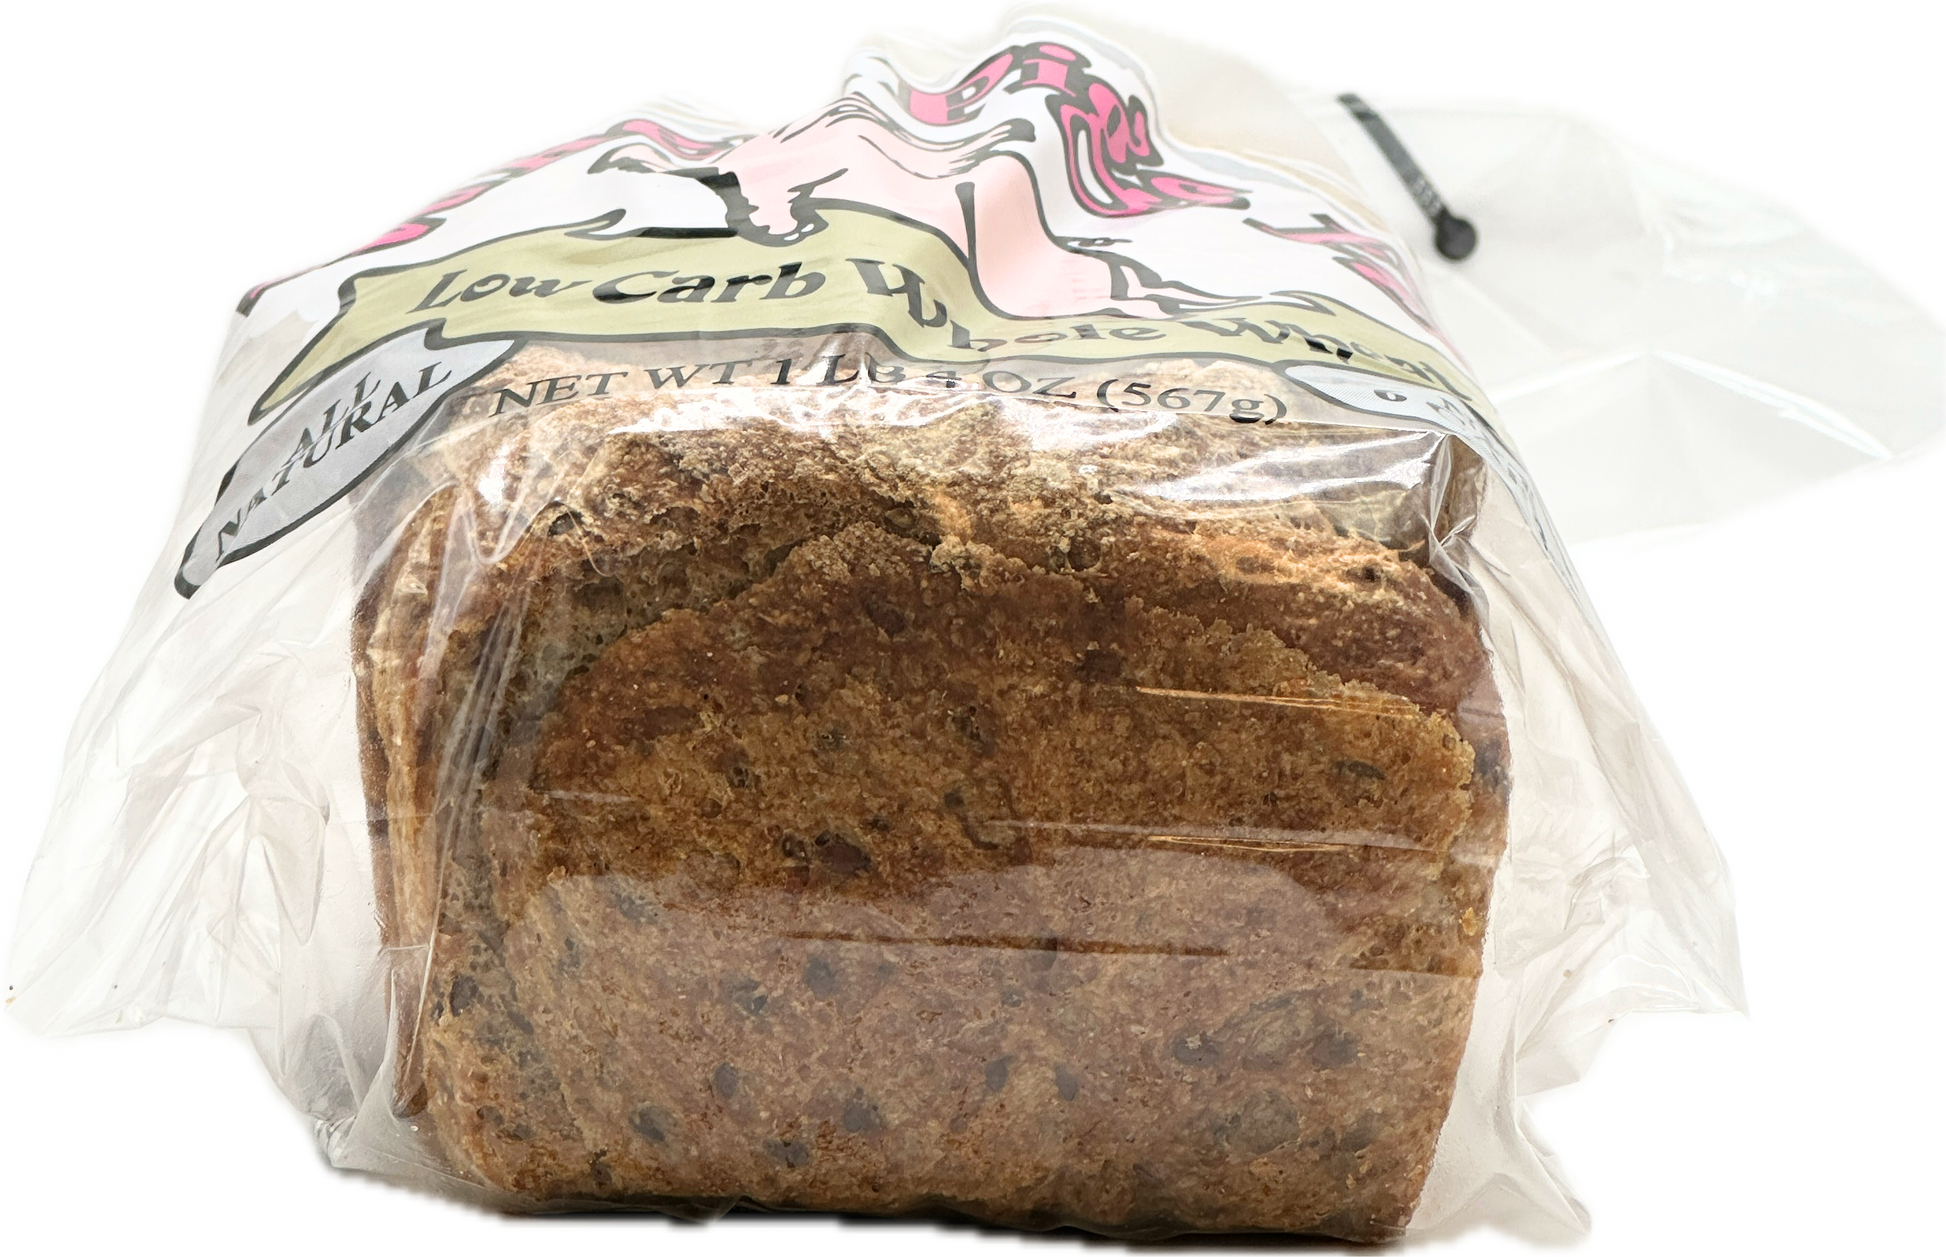 Low Carb Bread